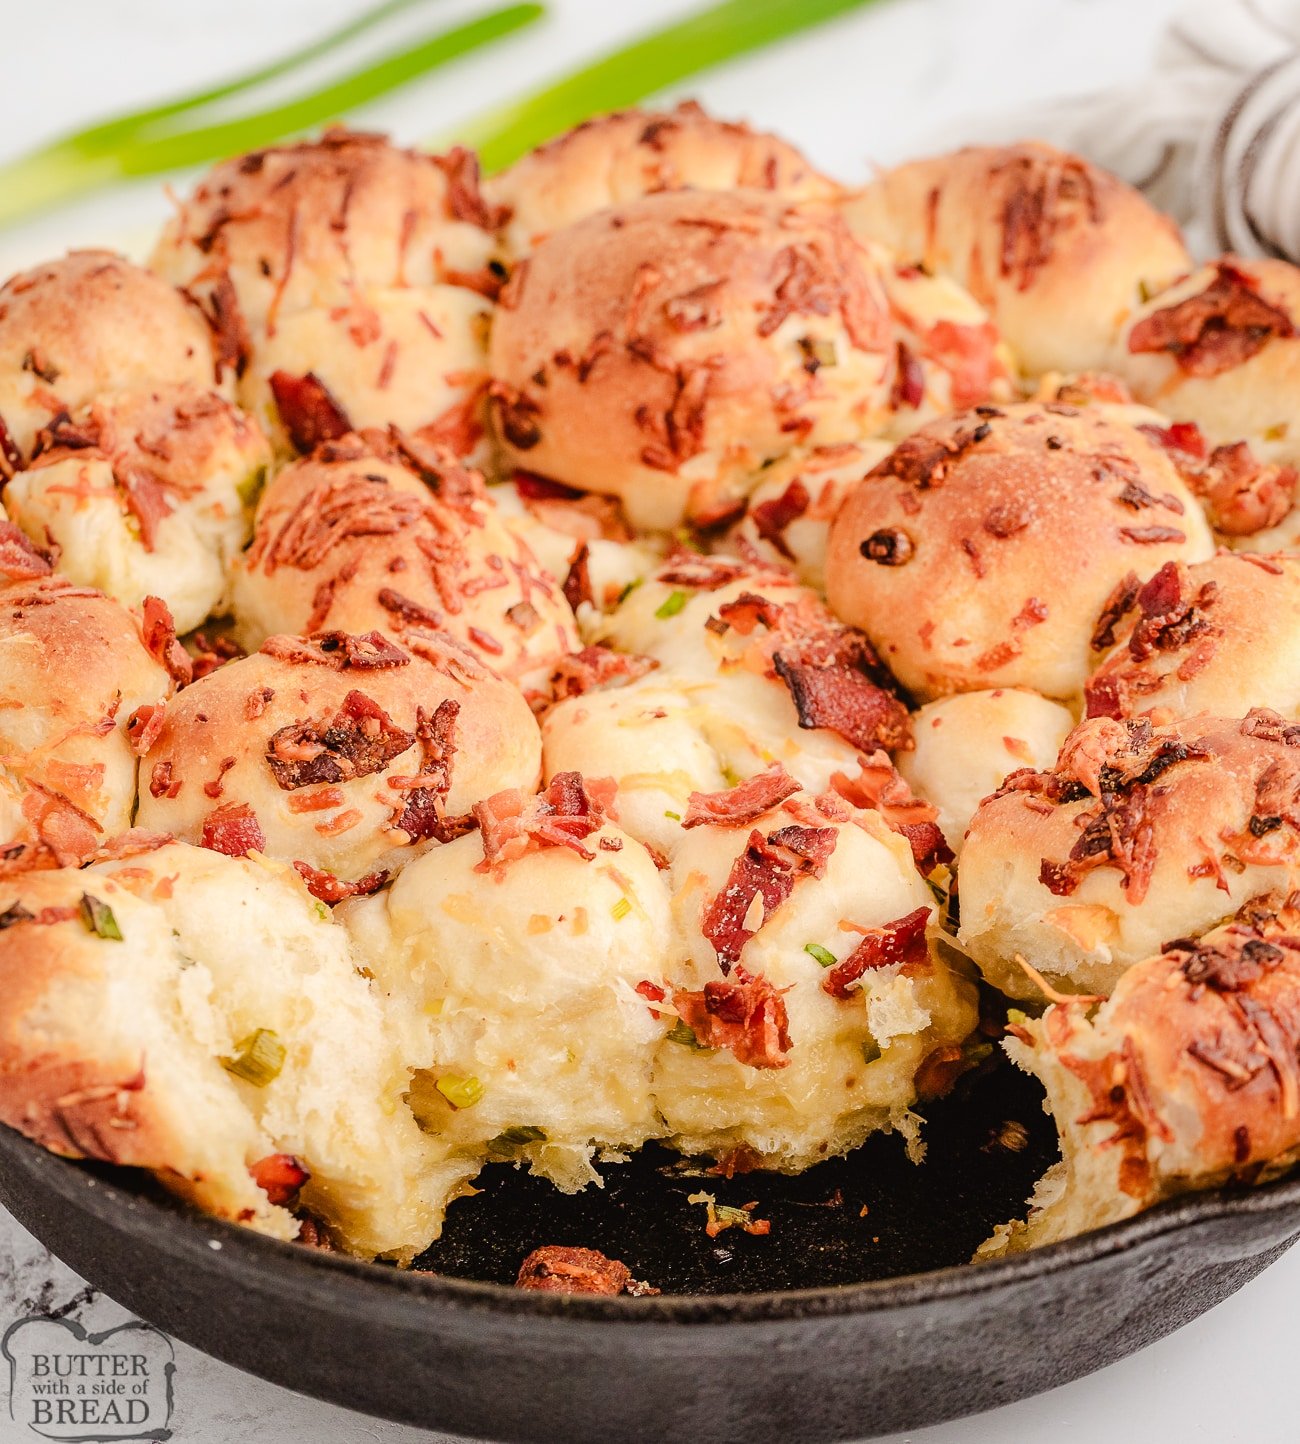 Parmesan bacon bread recipe baked in a skillet